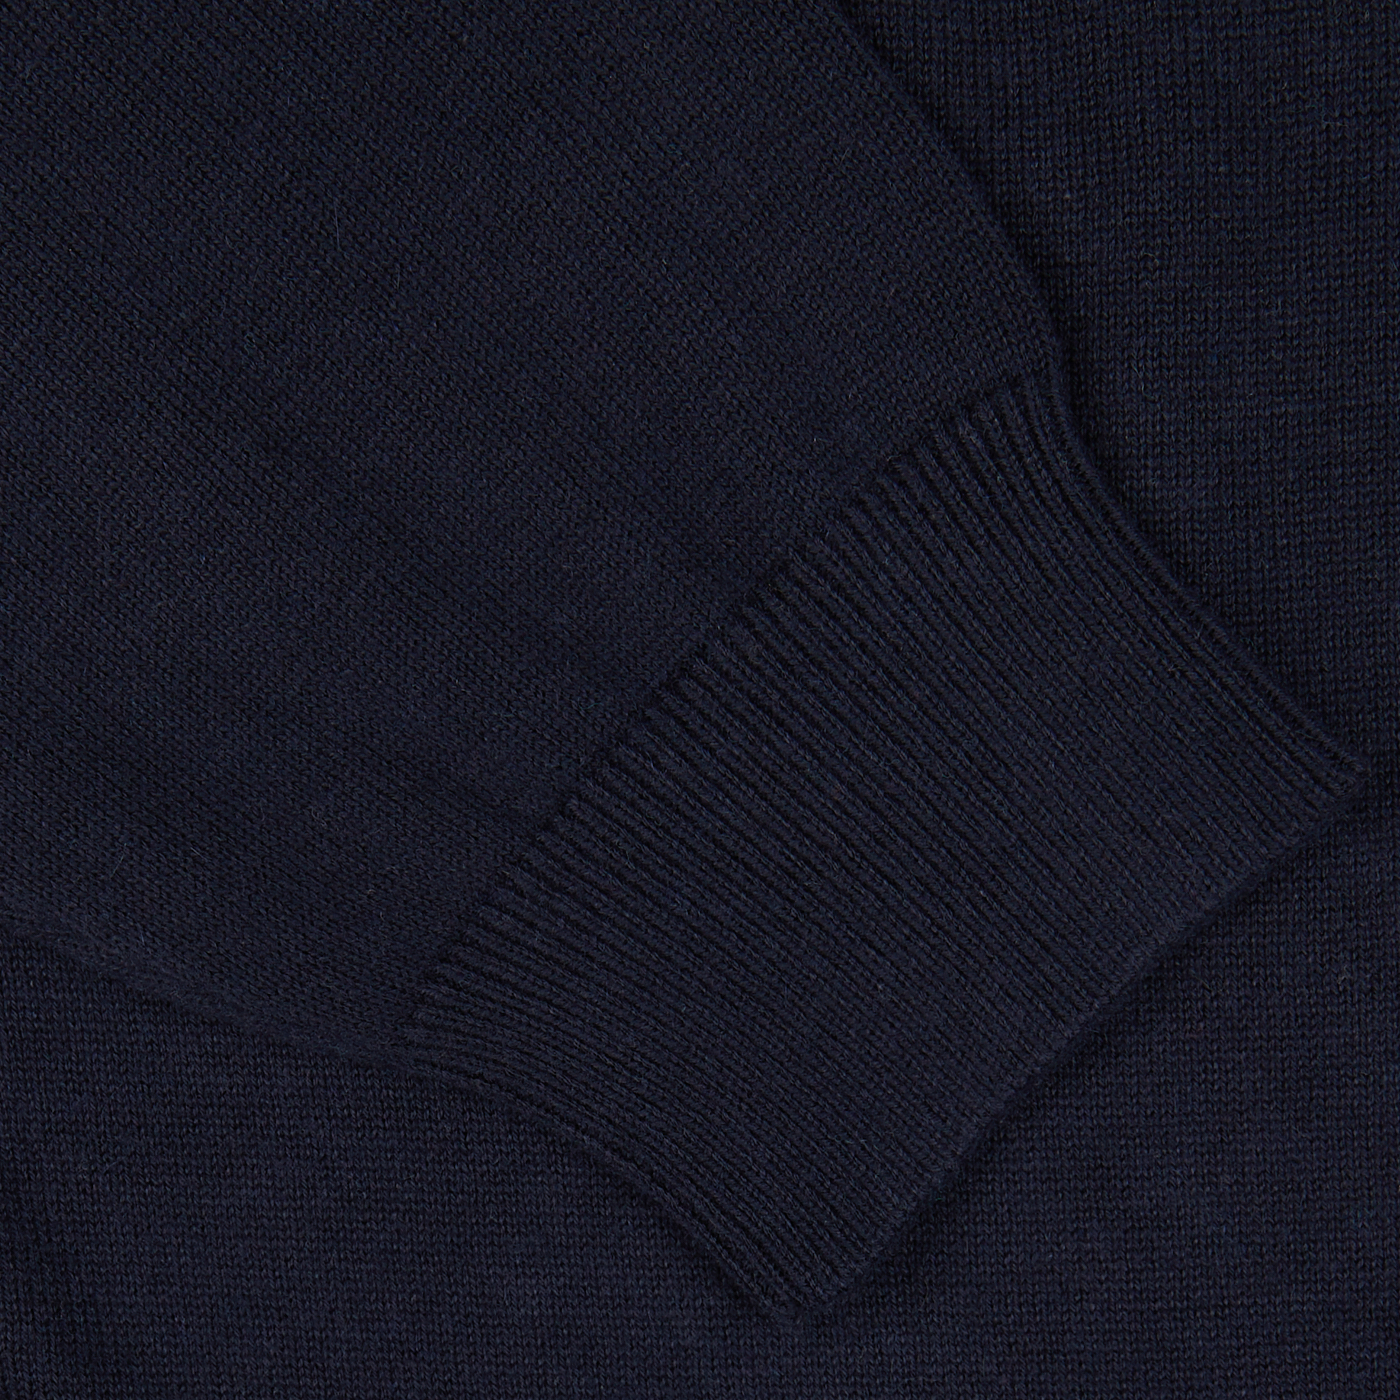 Close-up of an Alan Paine Navy Blue Luxury Cotton V-Neck Sweater with ribbed detailing.